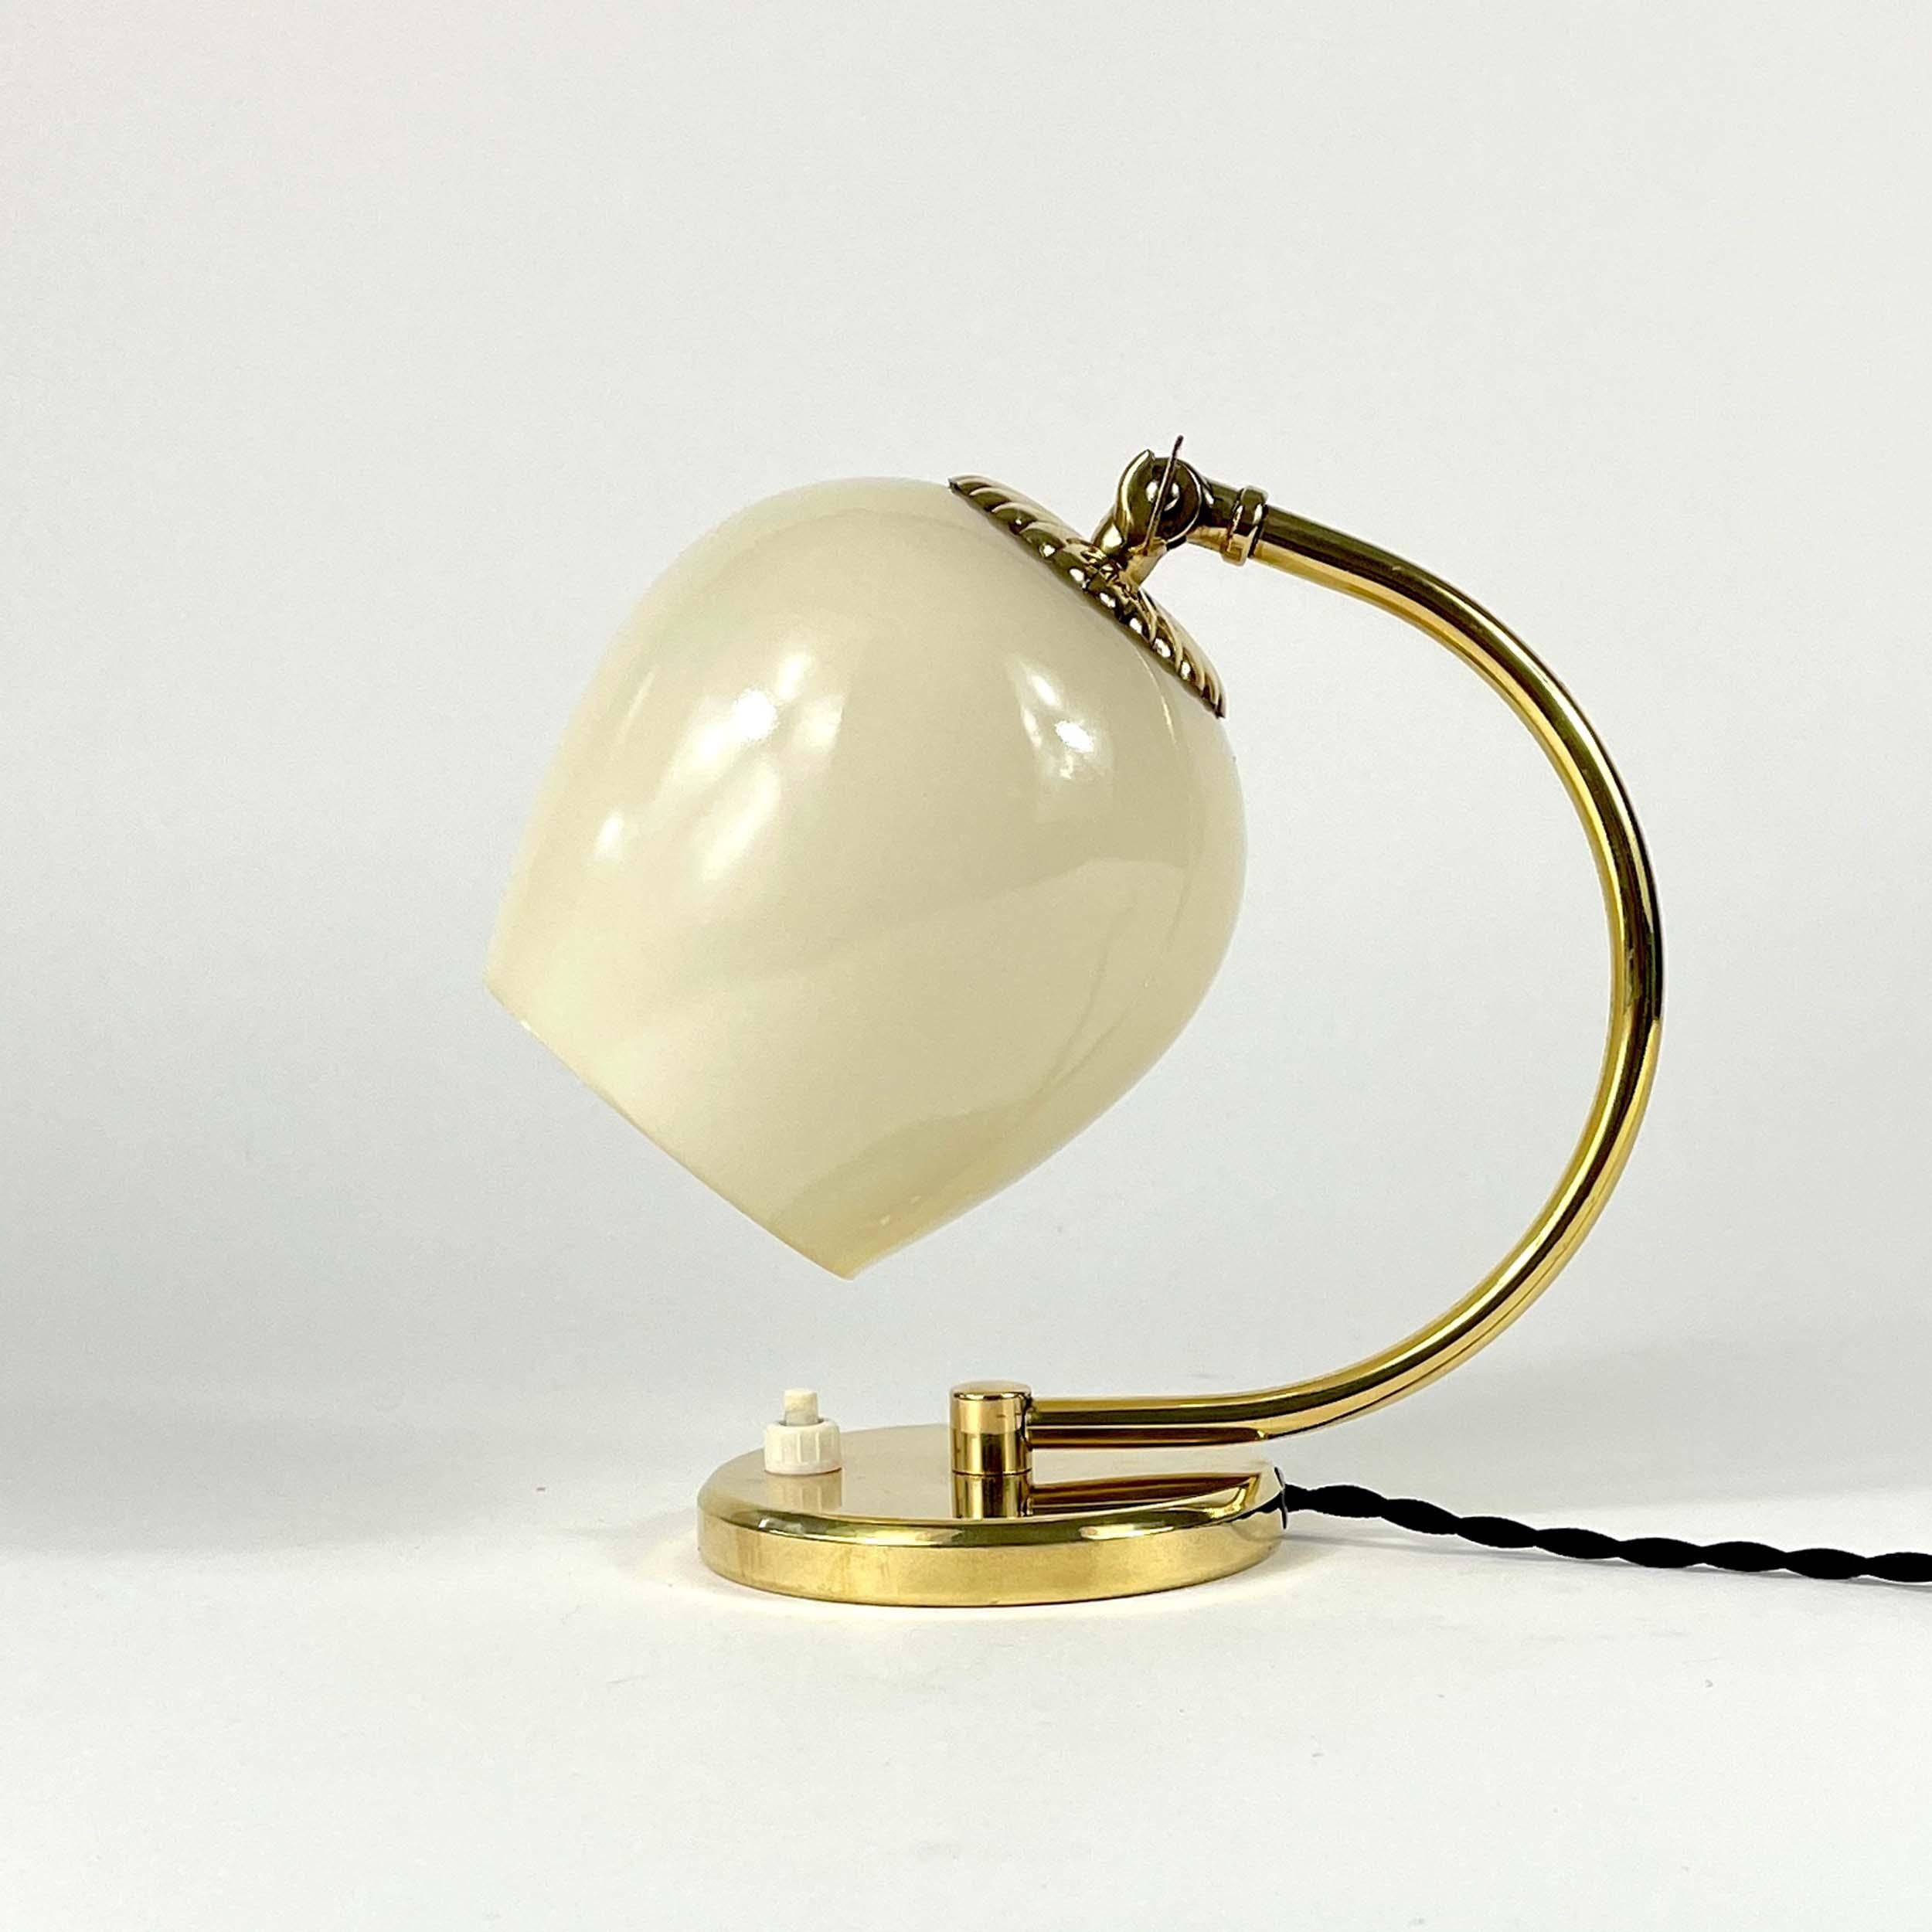 This beautiful table or bedside lamp was designed and manufactured in Finland in the late 1940s to 1950s. It features a cream colored opaline lampshade and brass hardware.

The light has been rewired with new black fabric cord and requests one